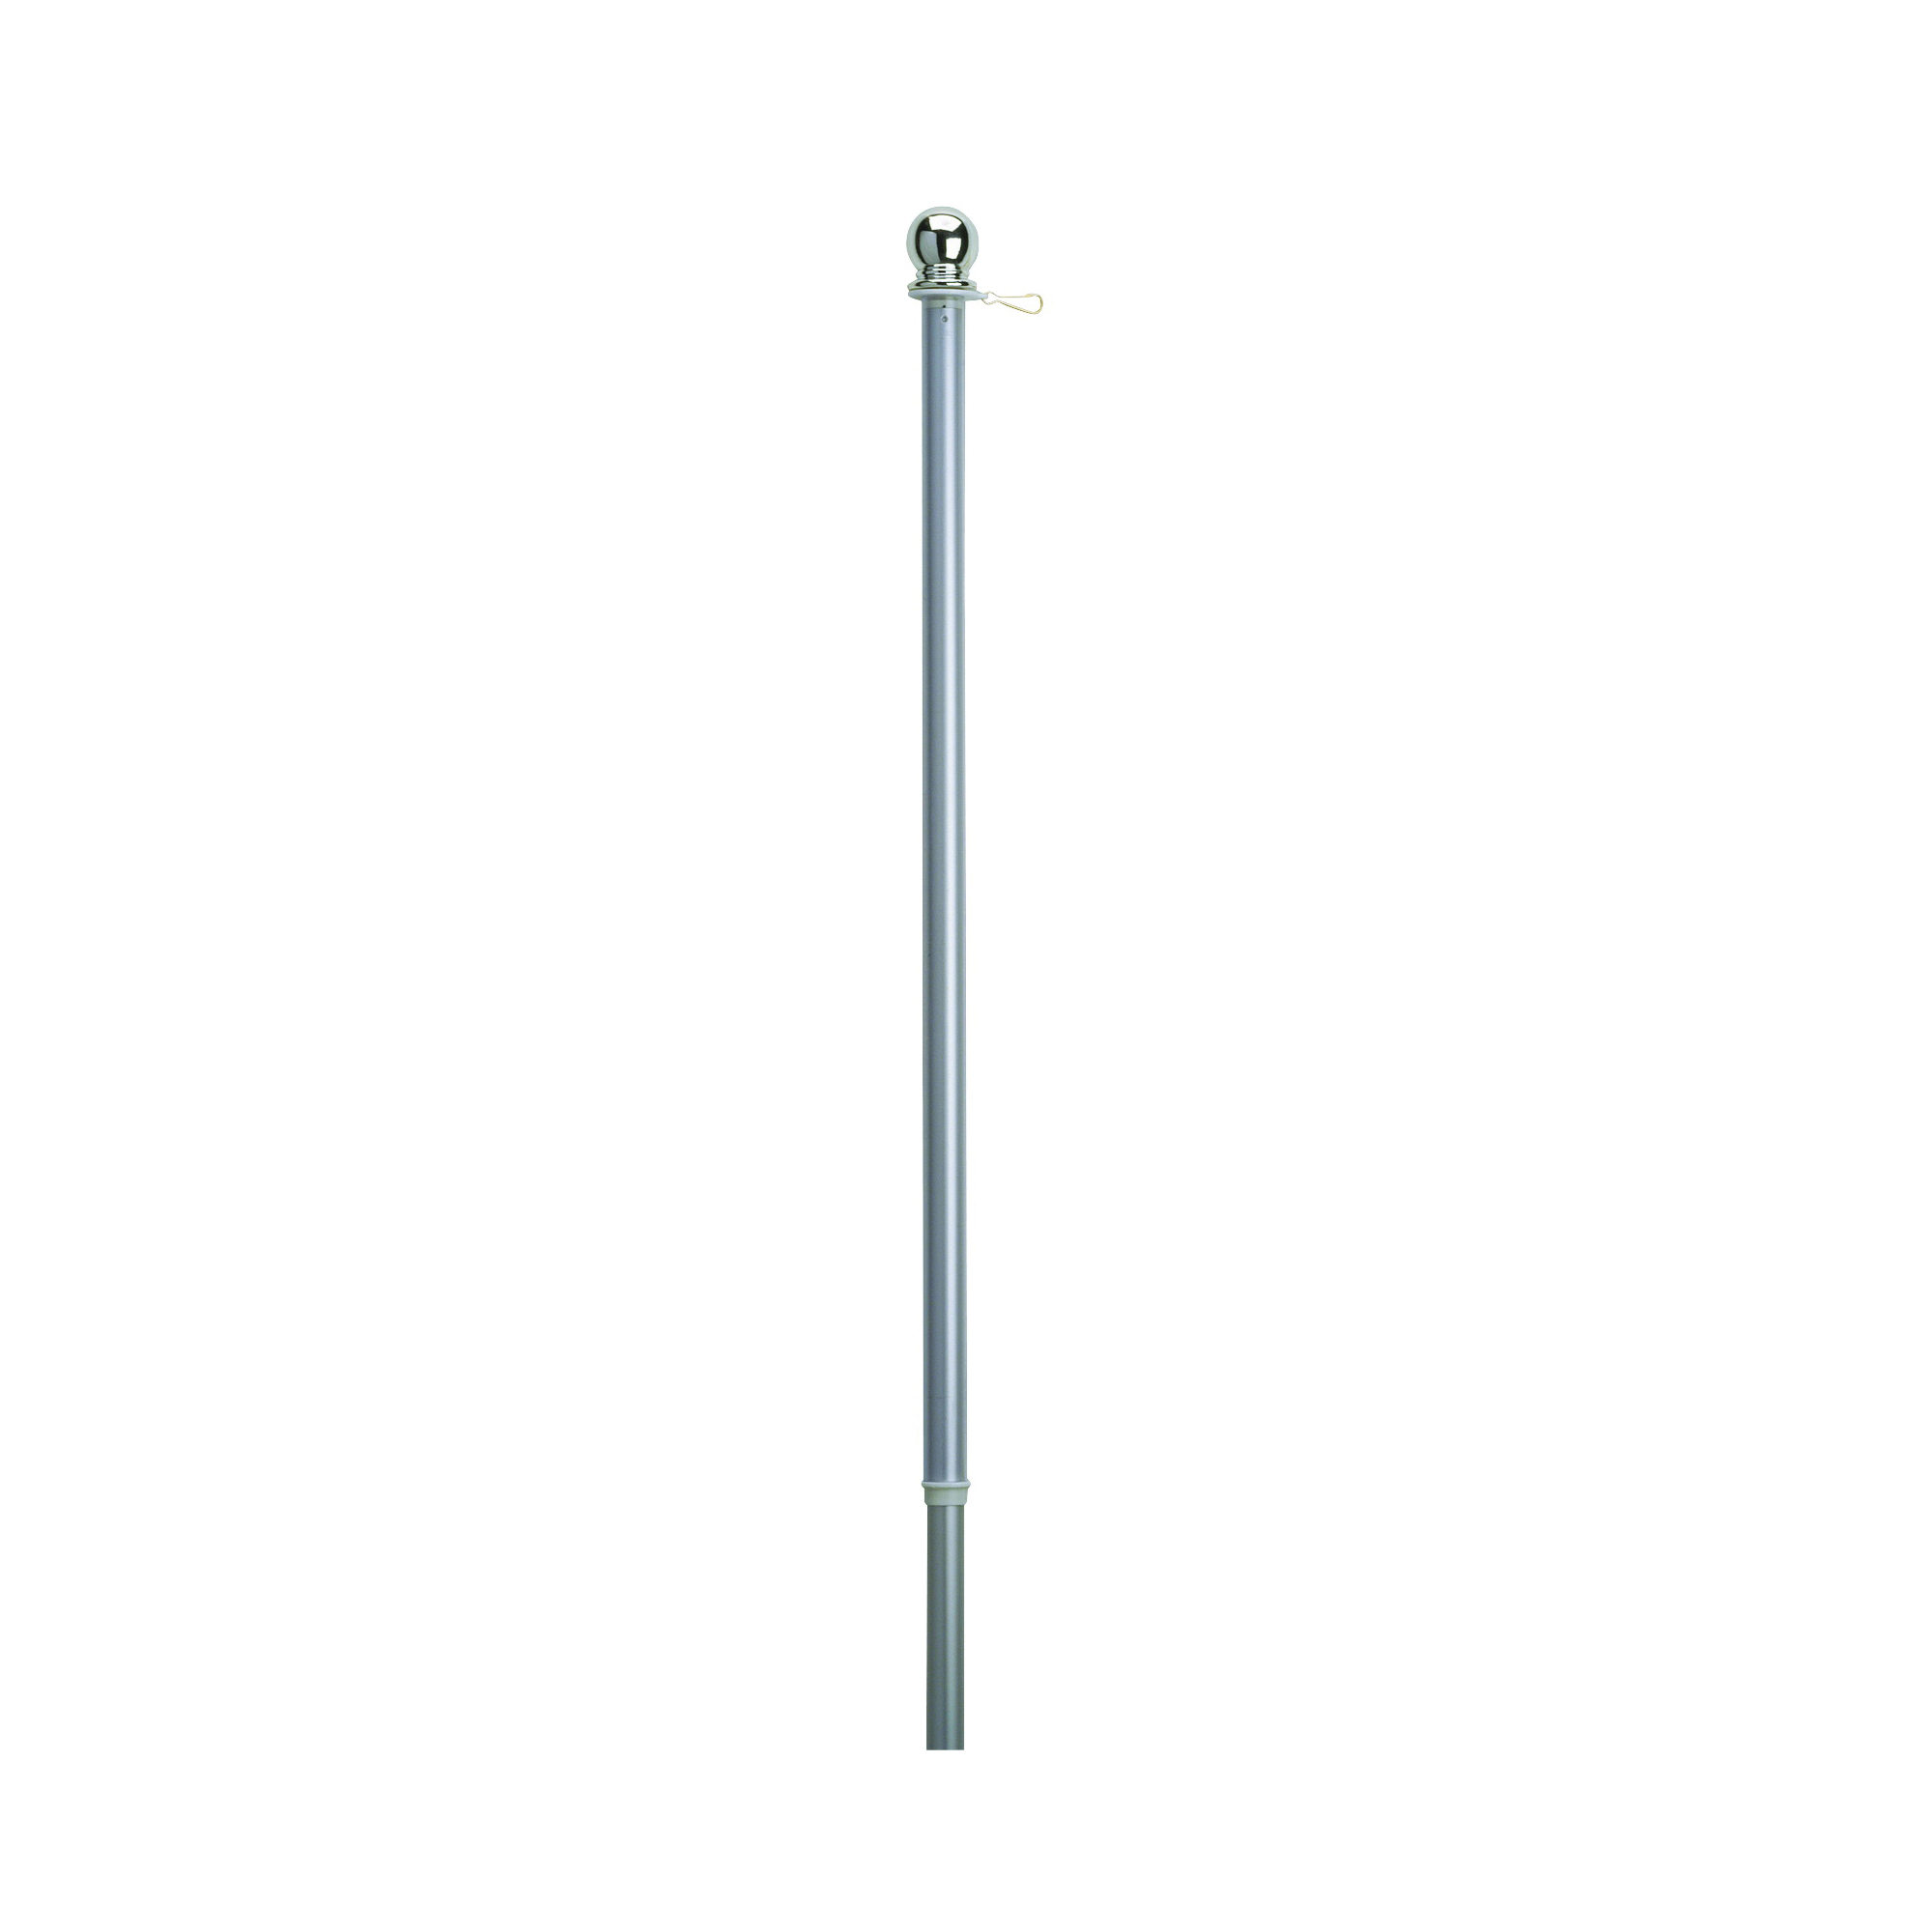 Valley Forge 60731 Flag Pole, 1 in Dia, Aluminum - 1